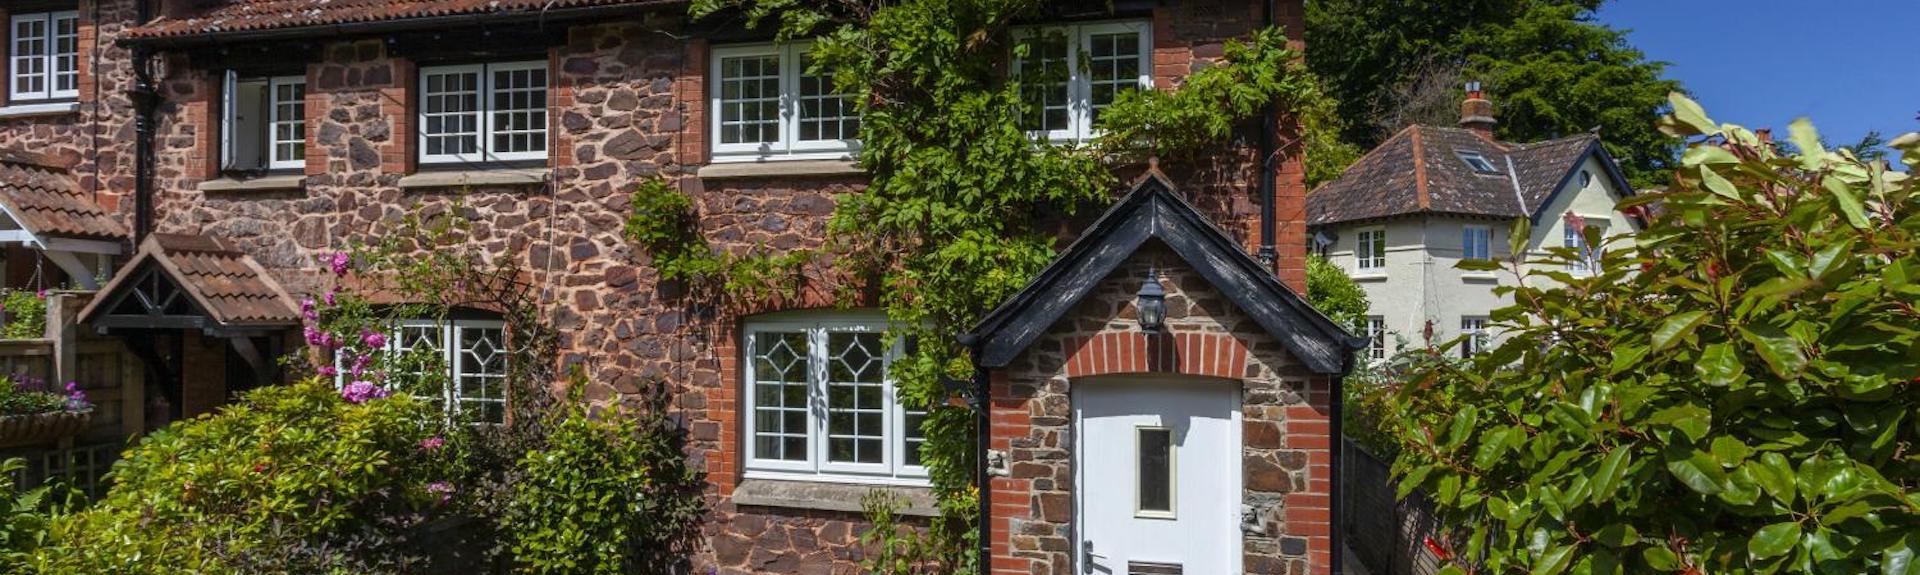 Exterior of a wisteria-clad stone-built holiday cottage in Porlock on a sunny day.